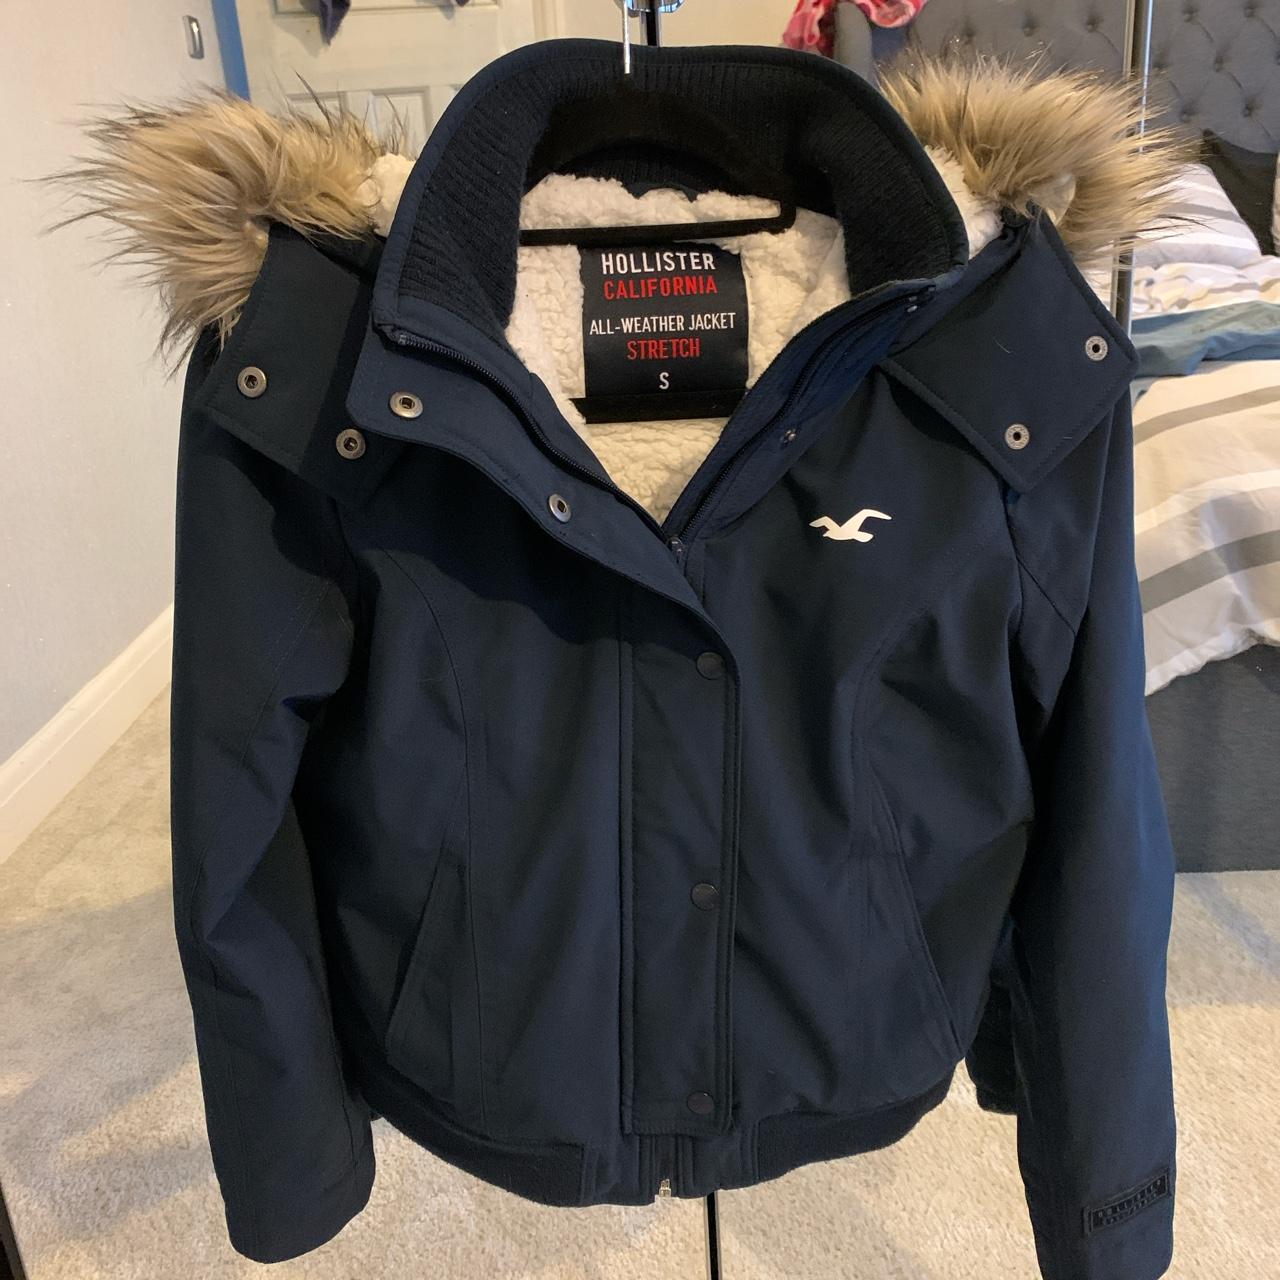 Best Hollister All Weather Jacket for sale in San Jose, California